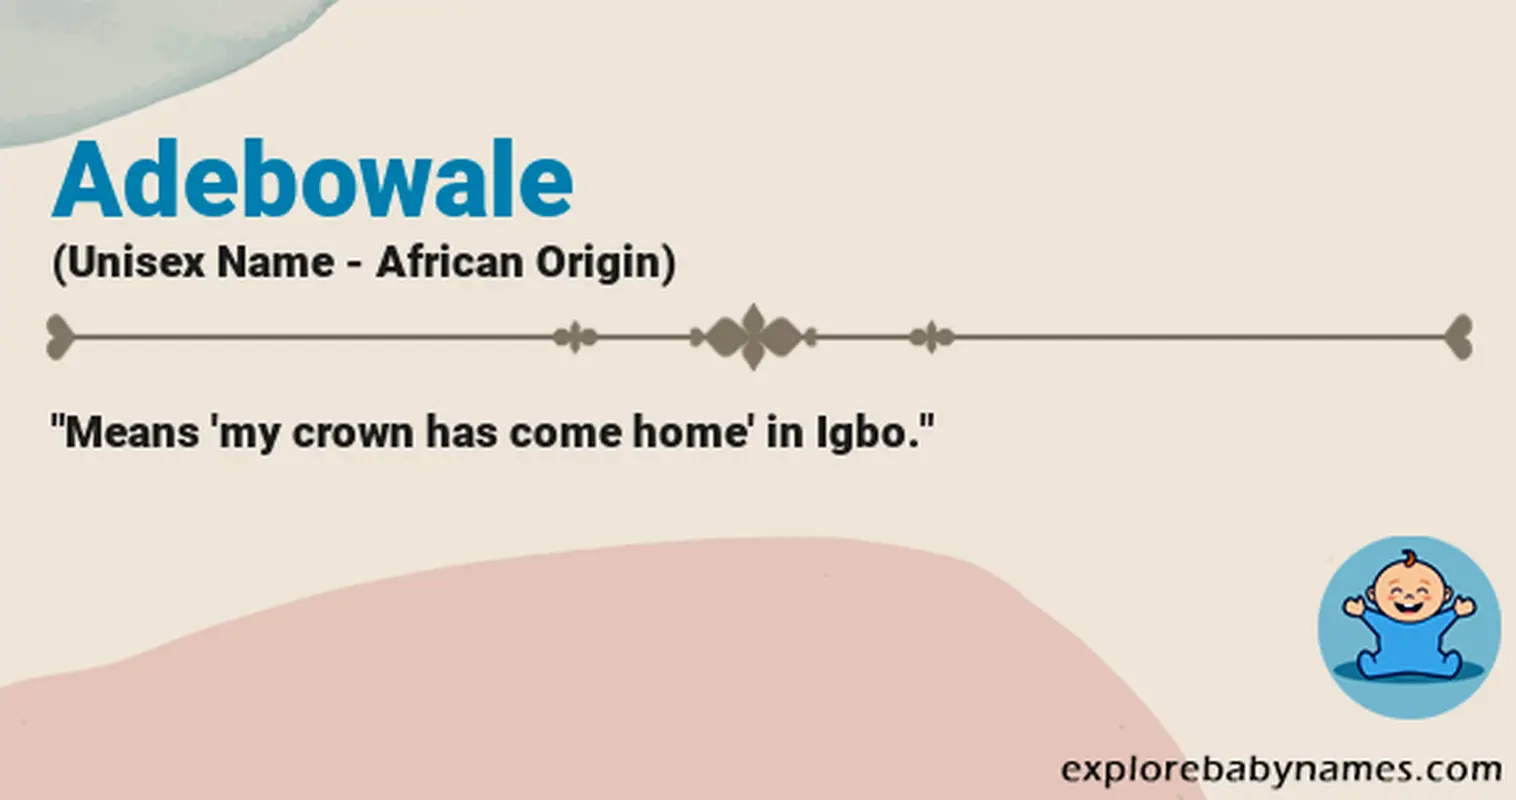 Meaning of Adebowale